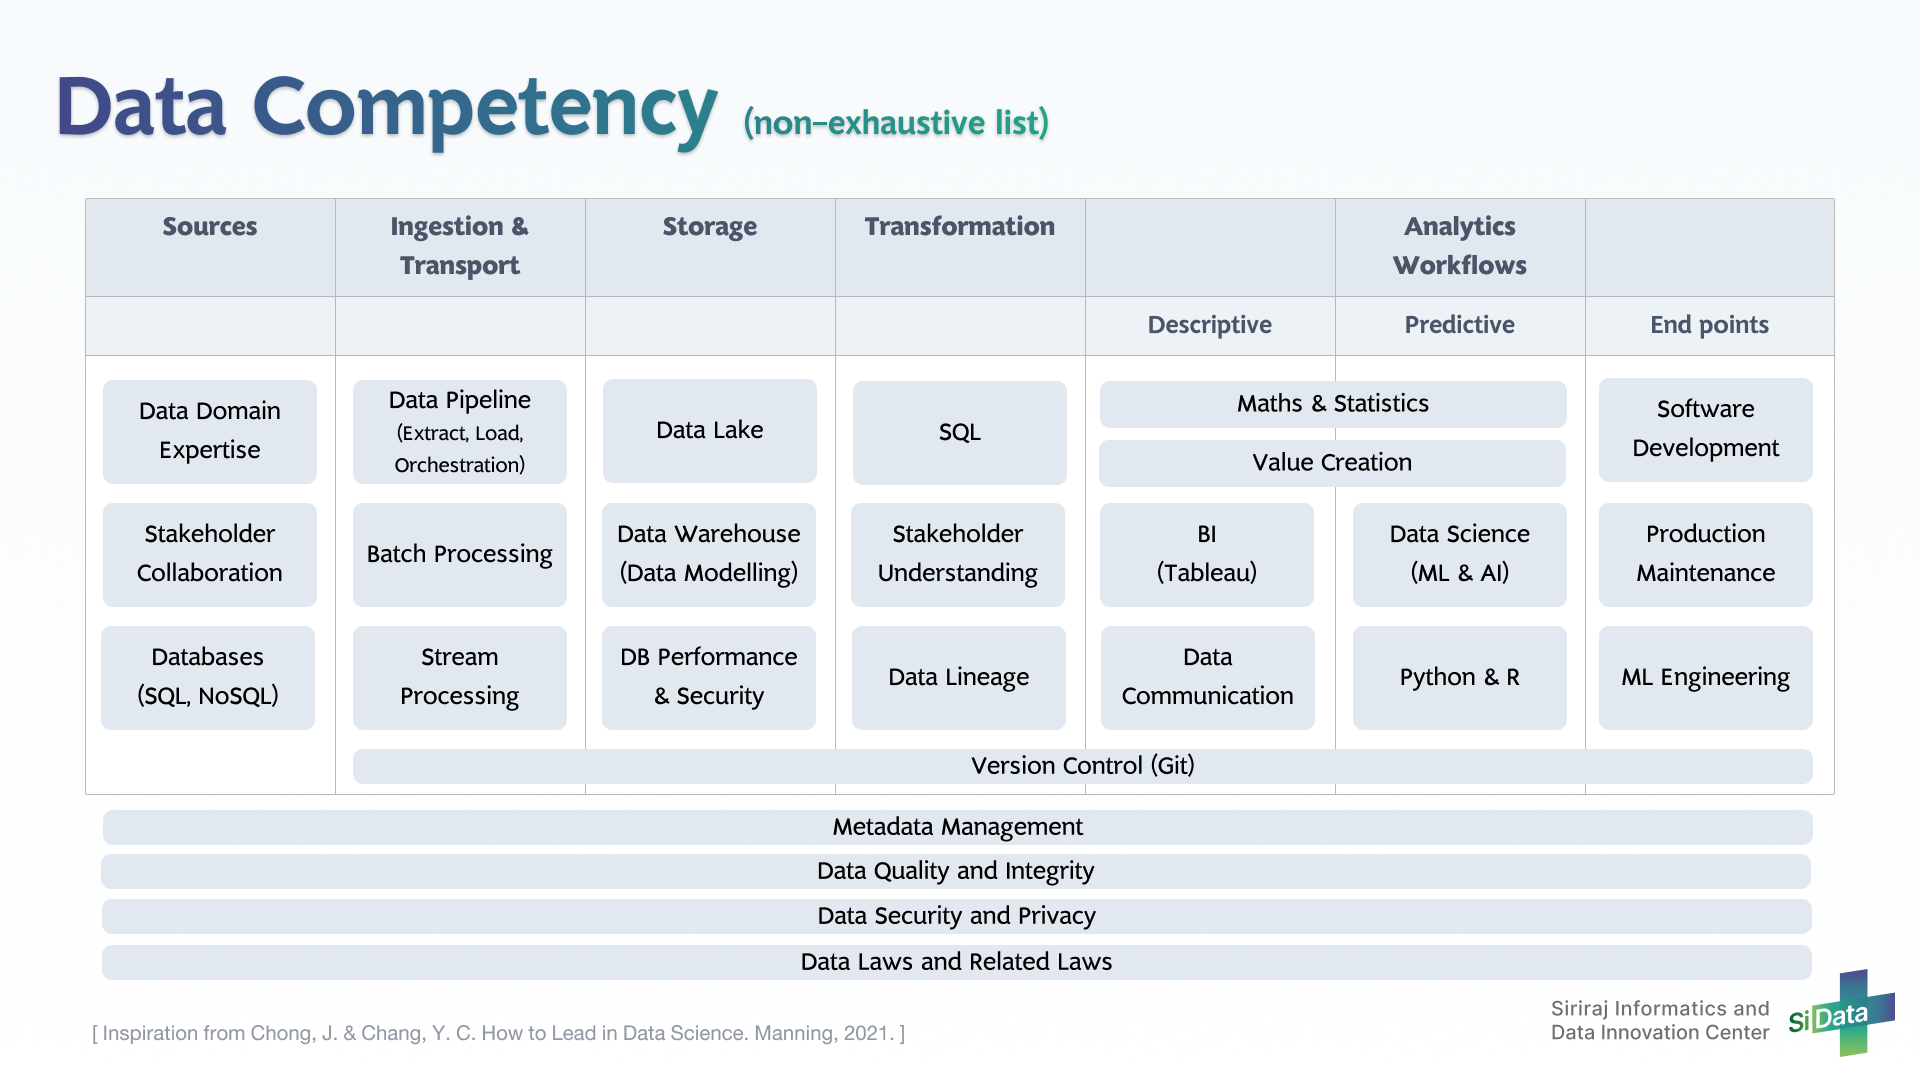 Data Competency